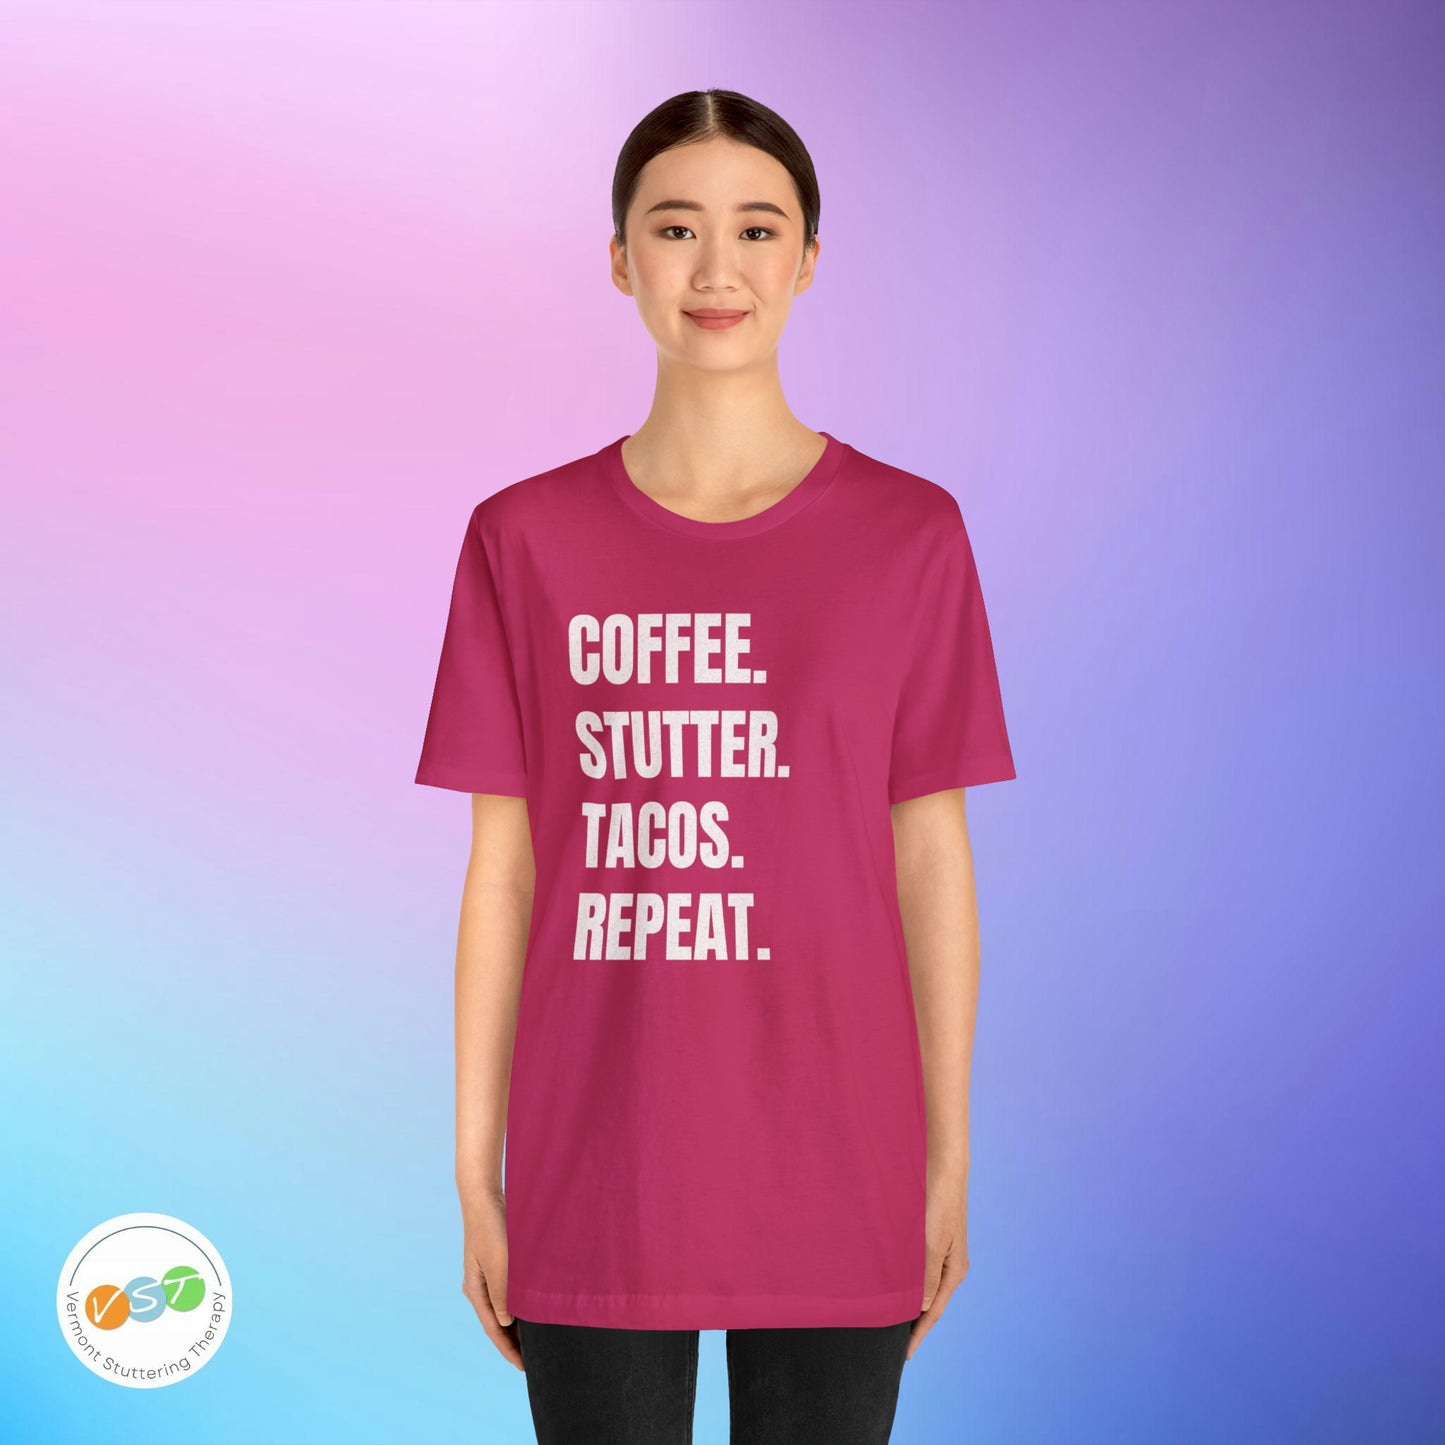 Coffee. Stutter. Tacos. Repeat. T-shirt